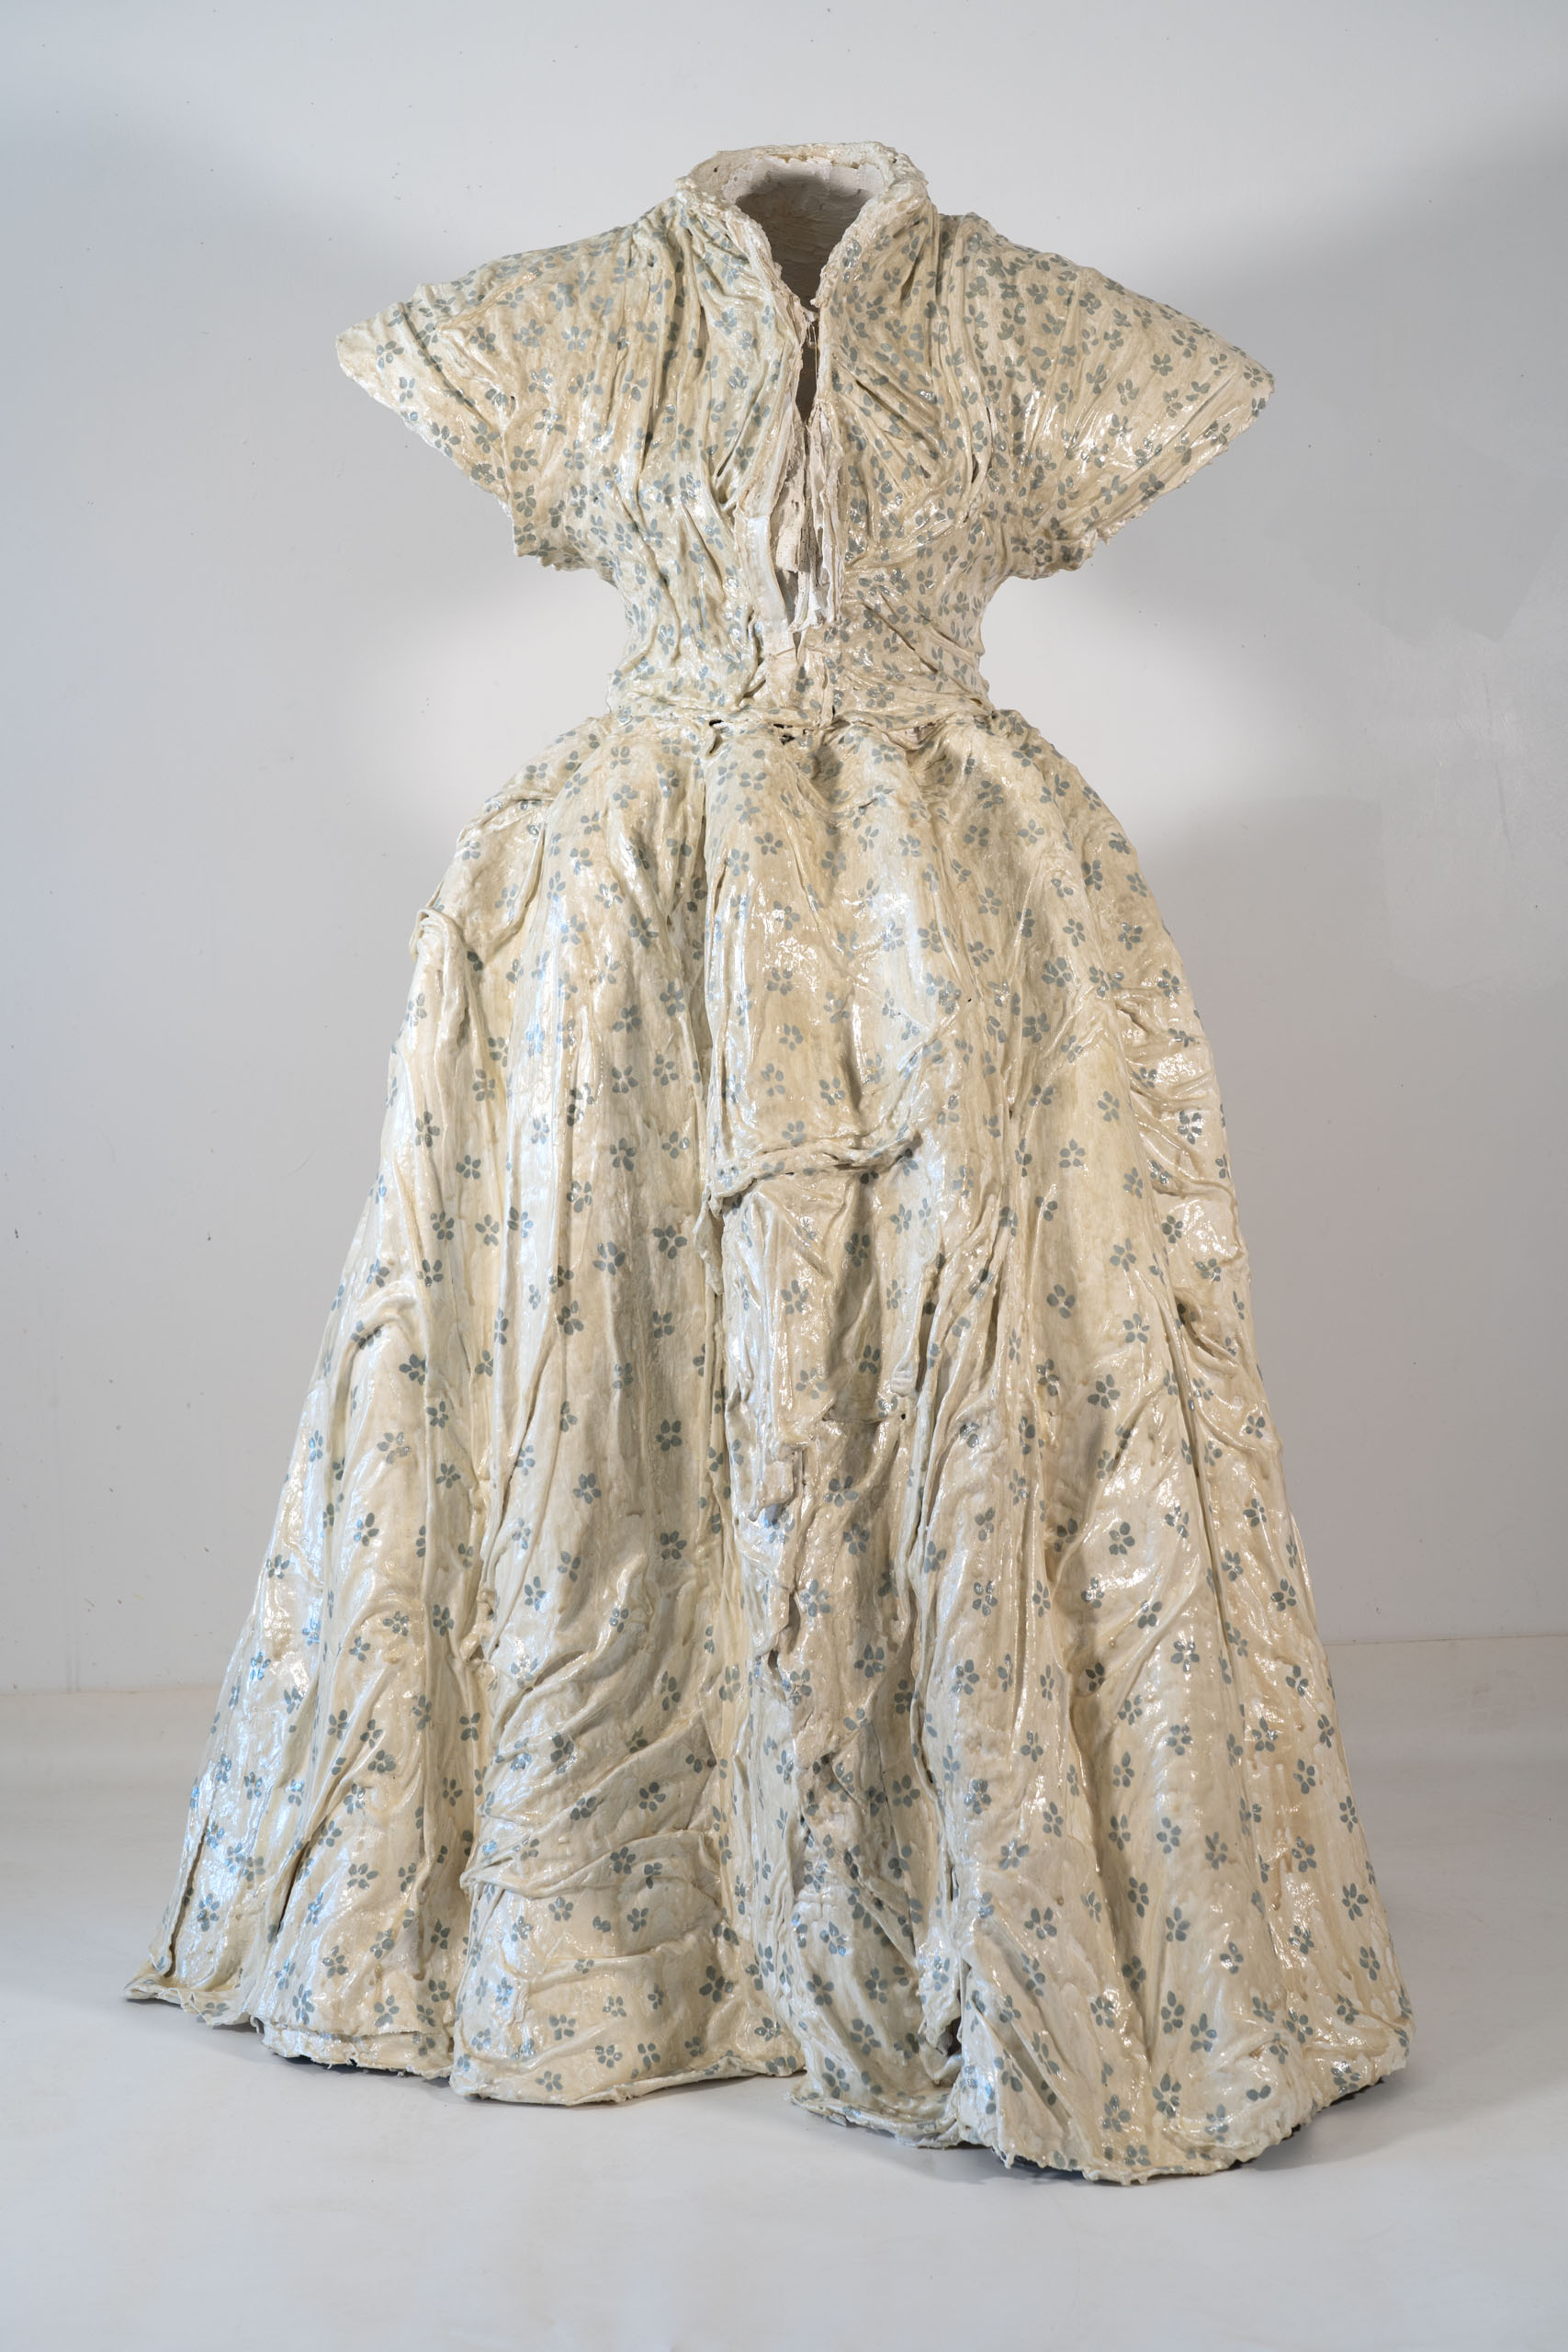 Wear it one day, plaster, mesh, painting on wooden mannequin, 140.5 x 78 x 103.5 cm, front view, 2020